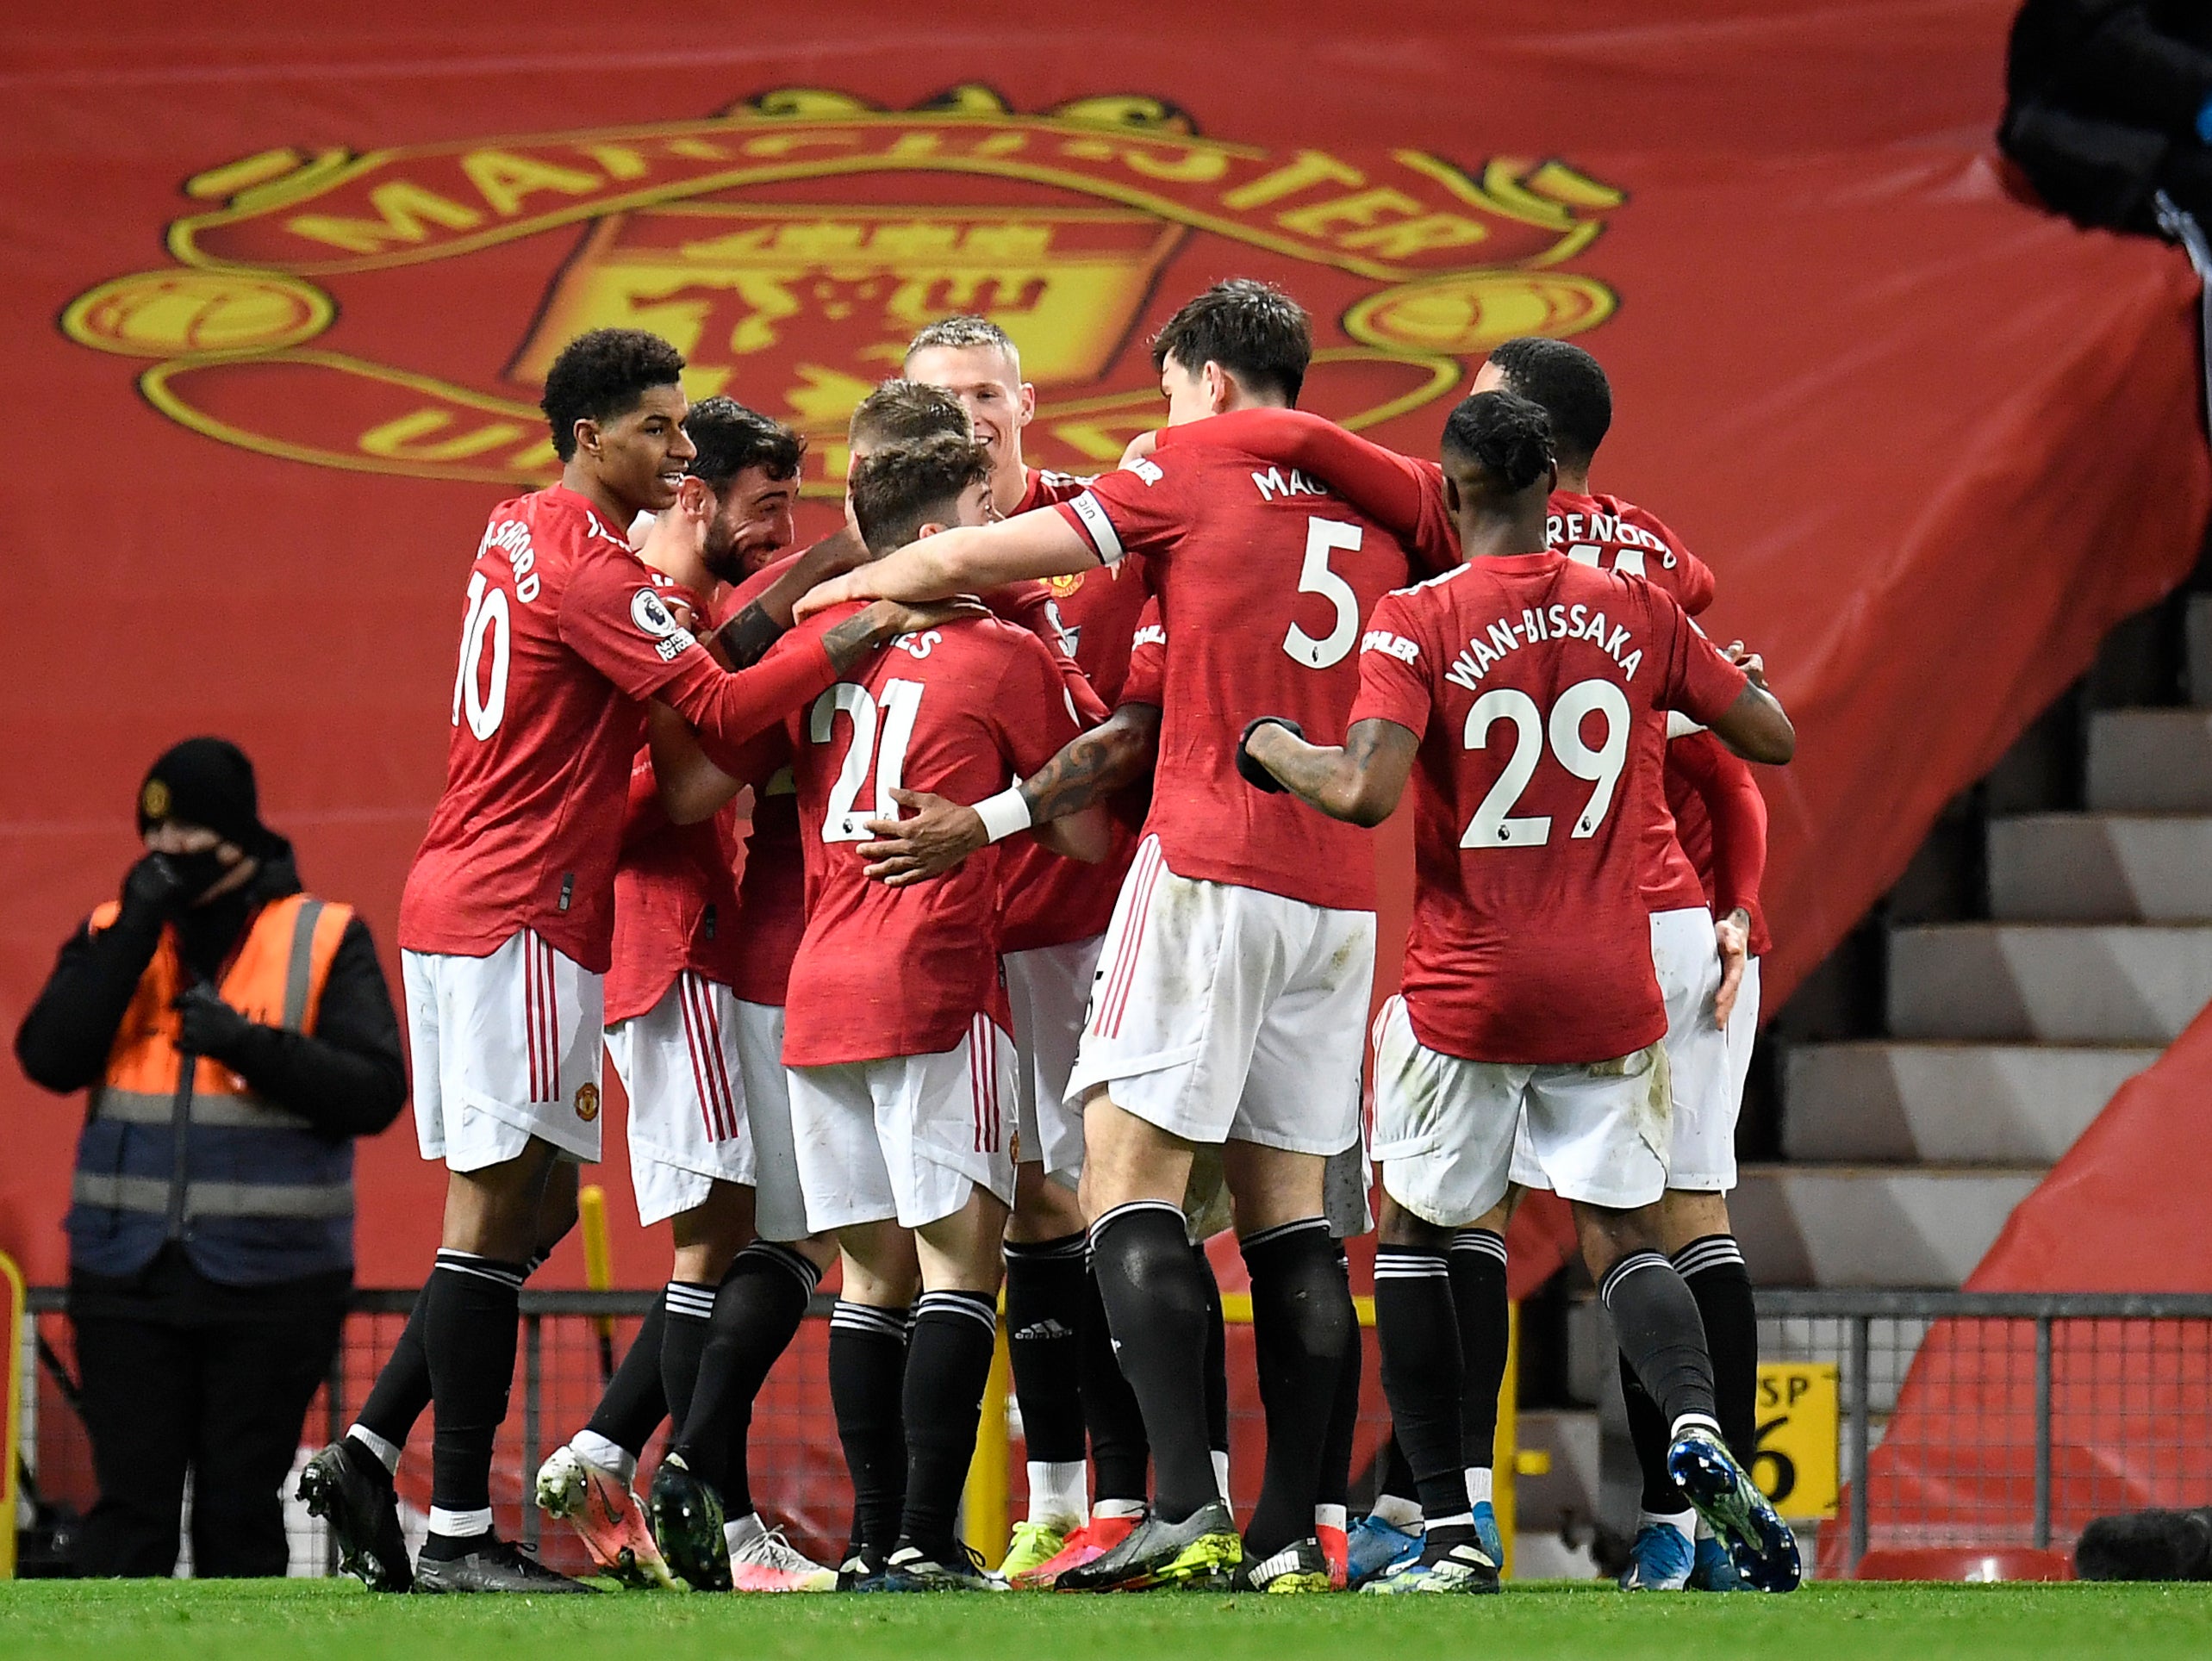 Manchester United’s players celebrate scoring against West Ham